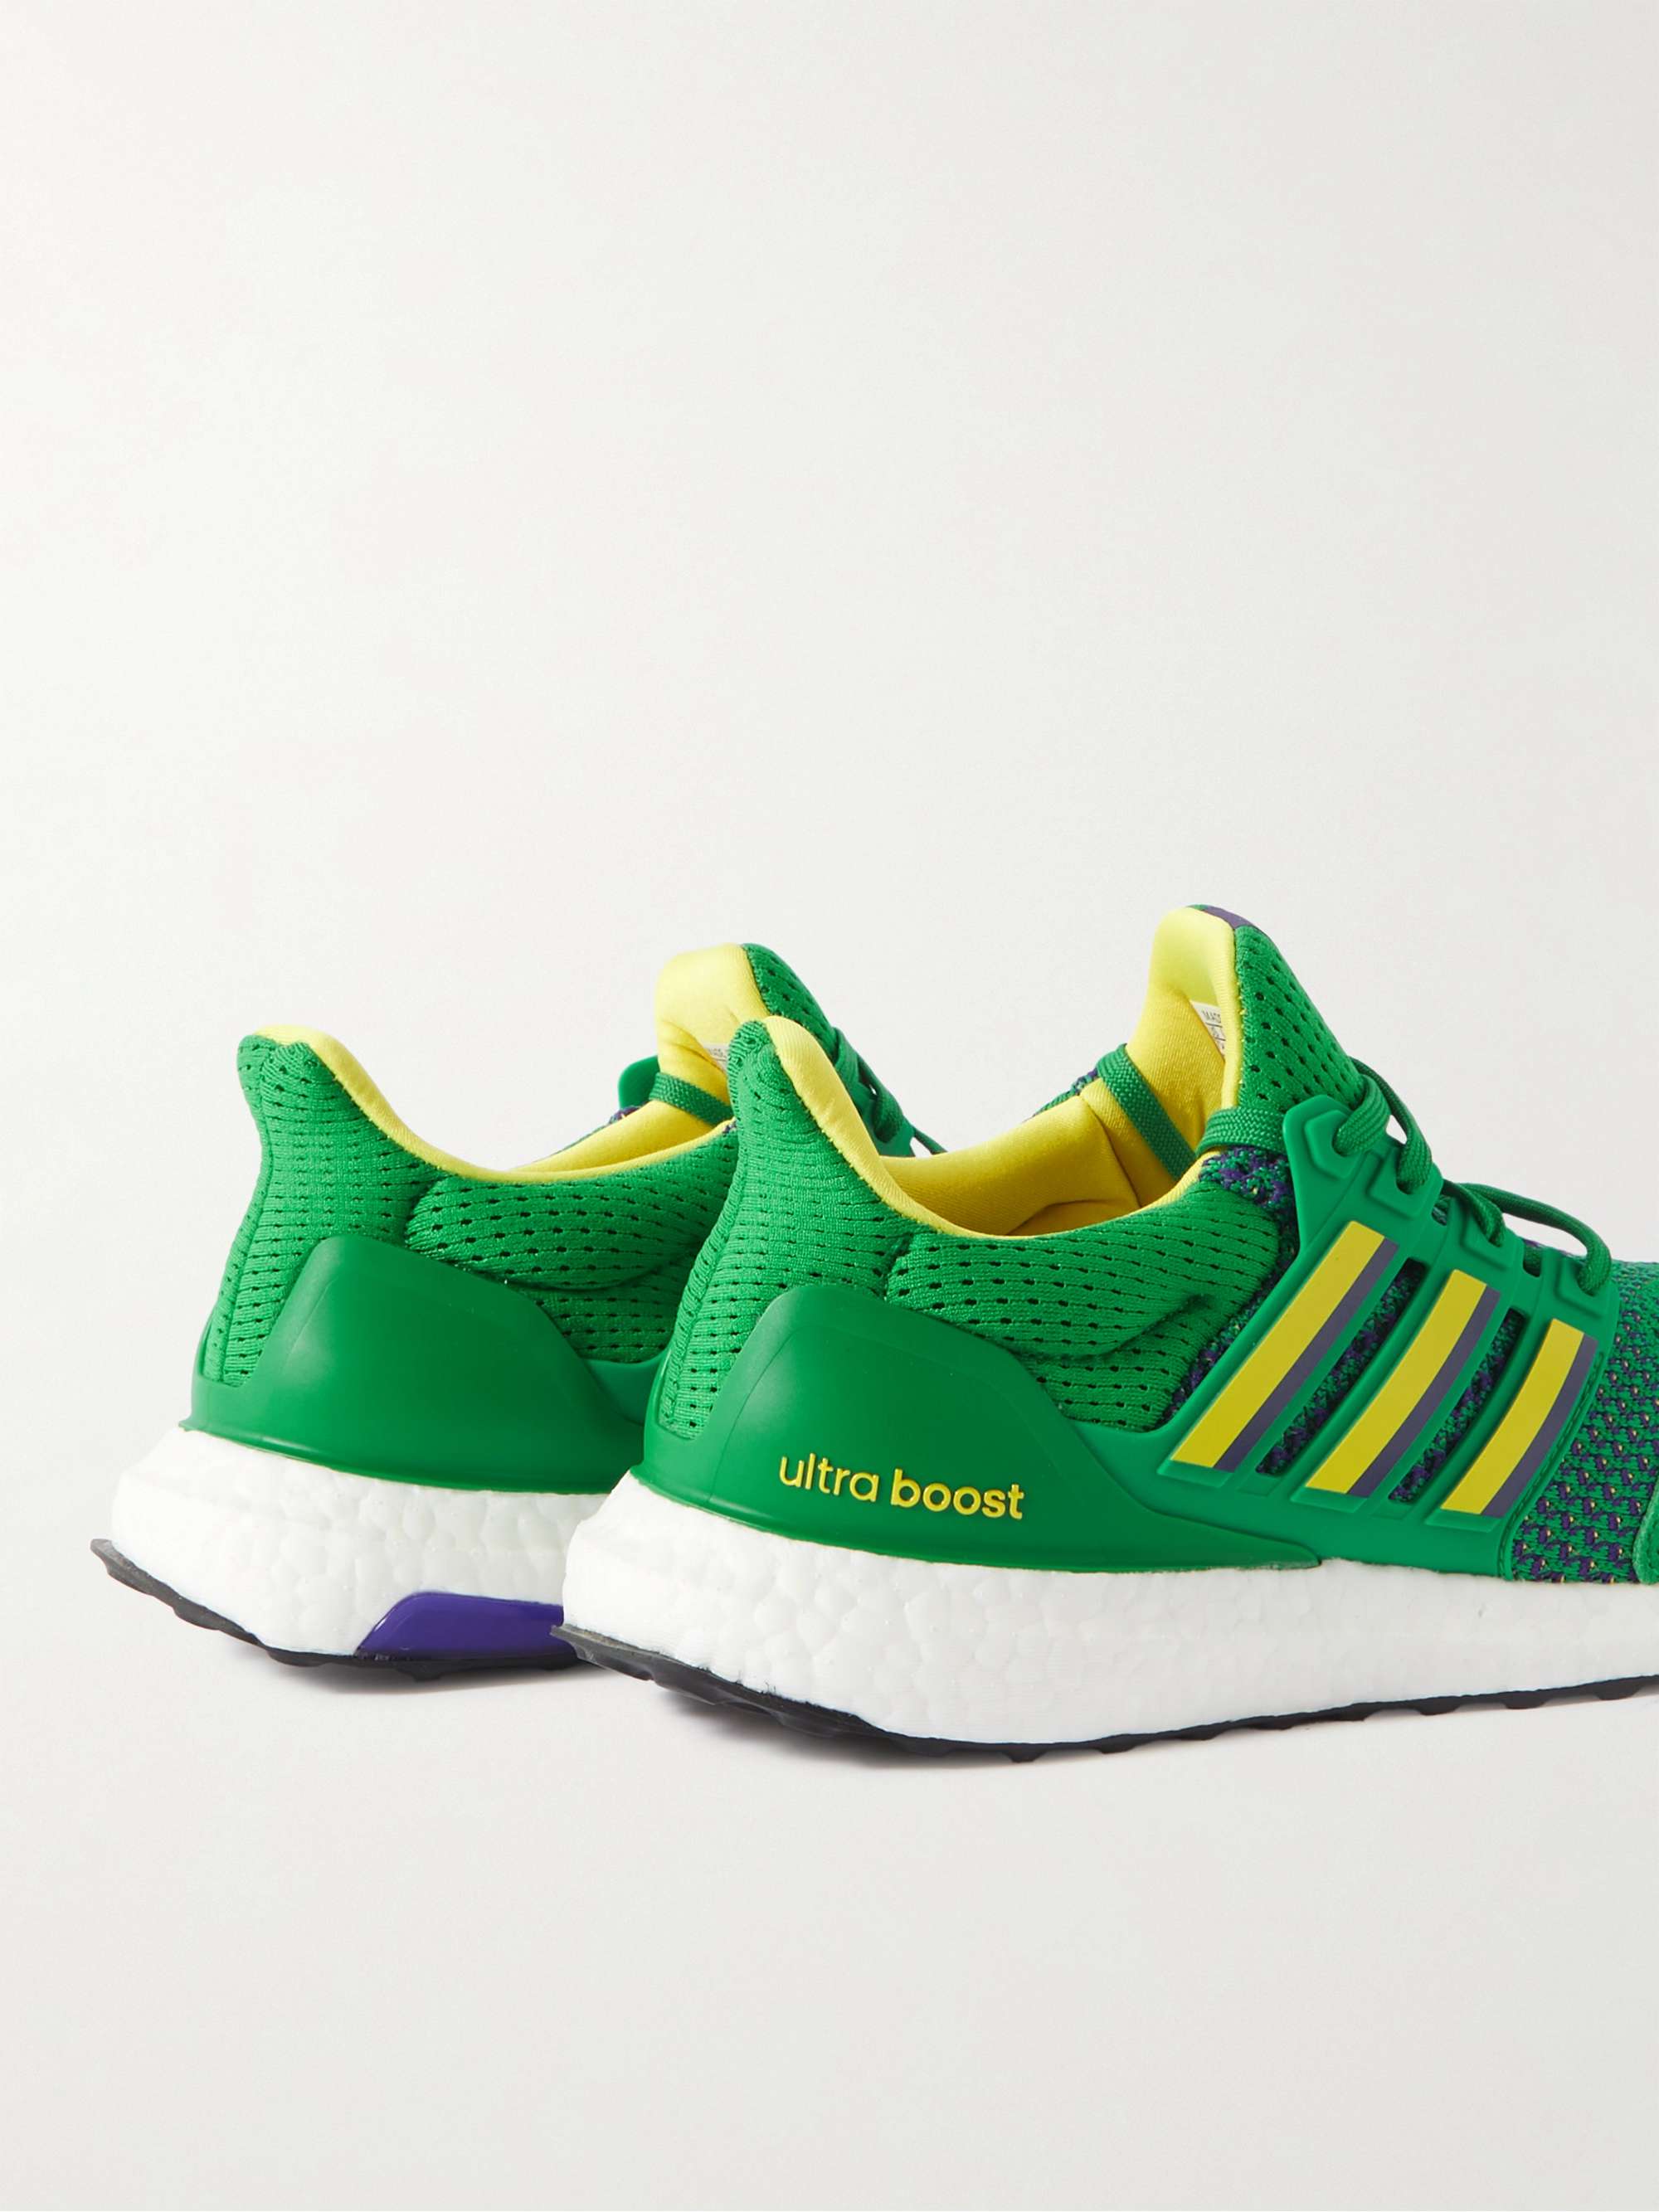 ADIDAS SPORT + The Mighty Ducks Ultraboost 1.0 Rubber-Trimmed Primeknit Running Sneakers